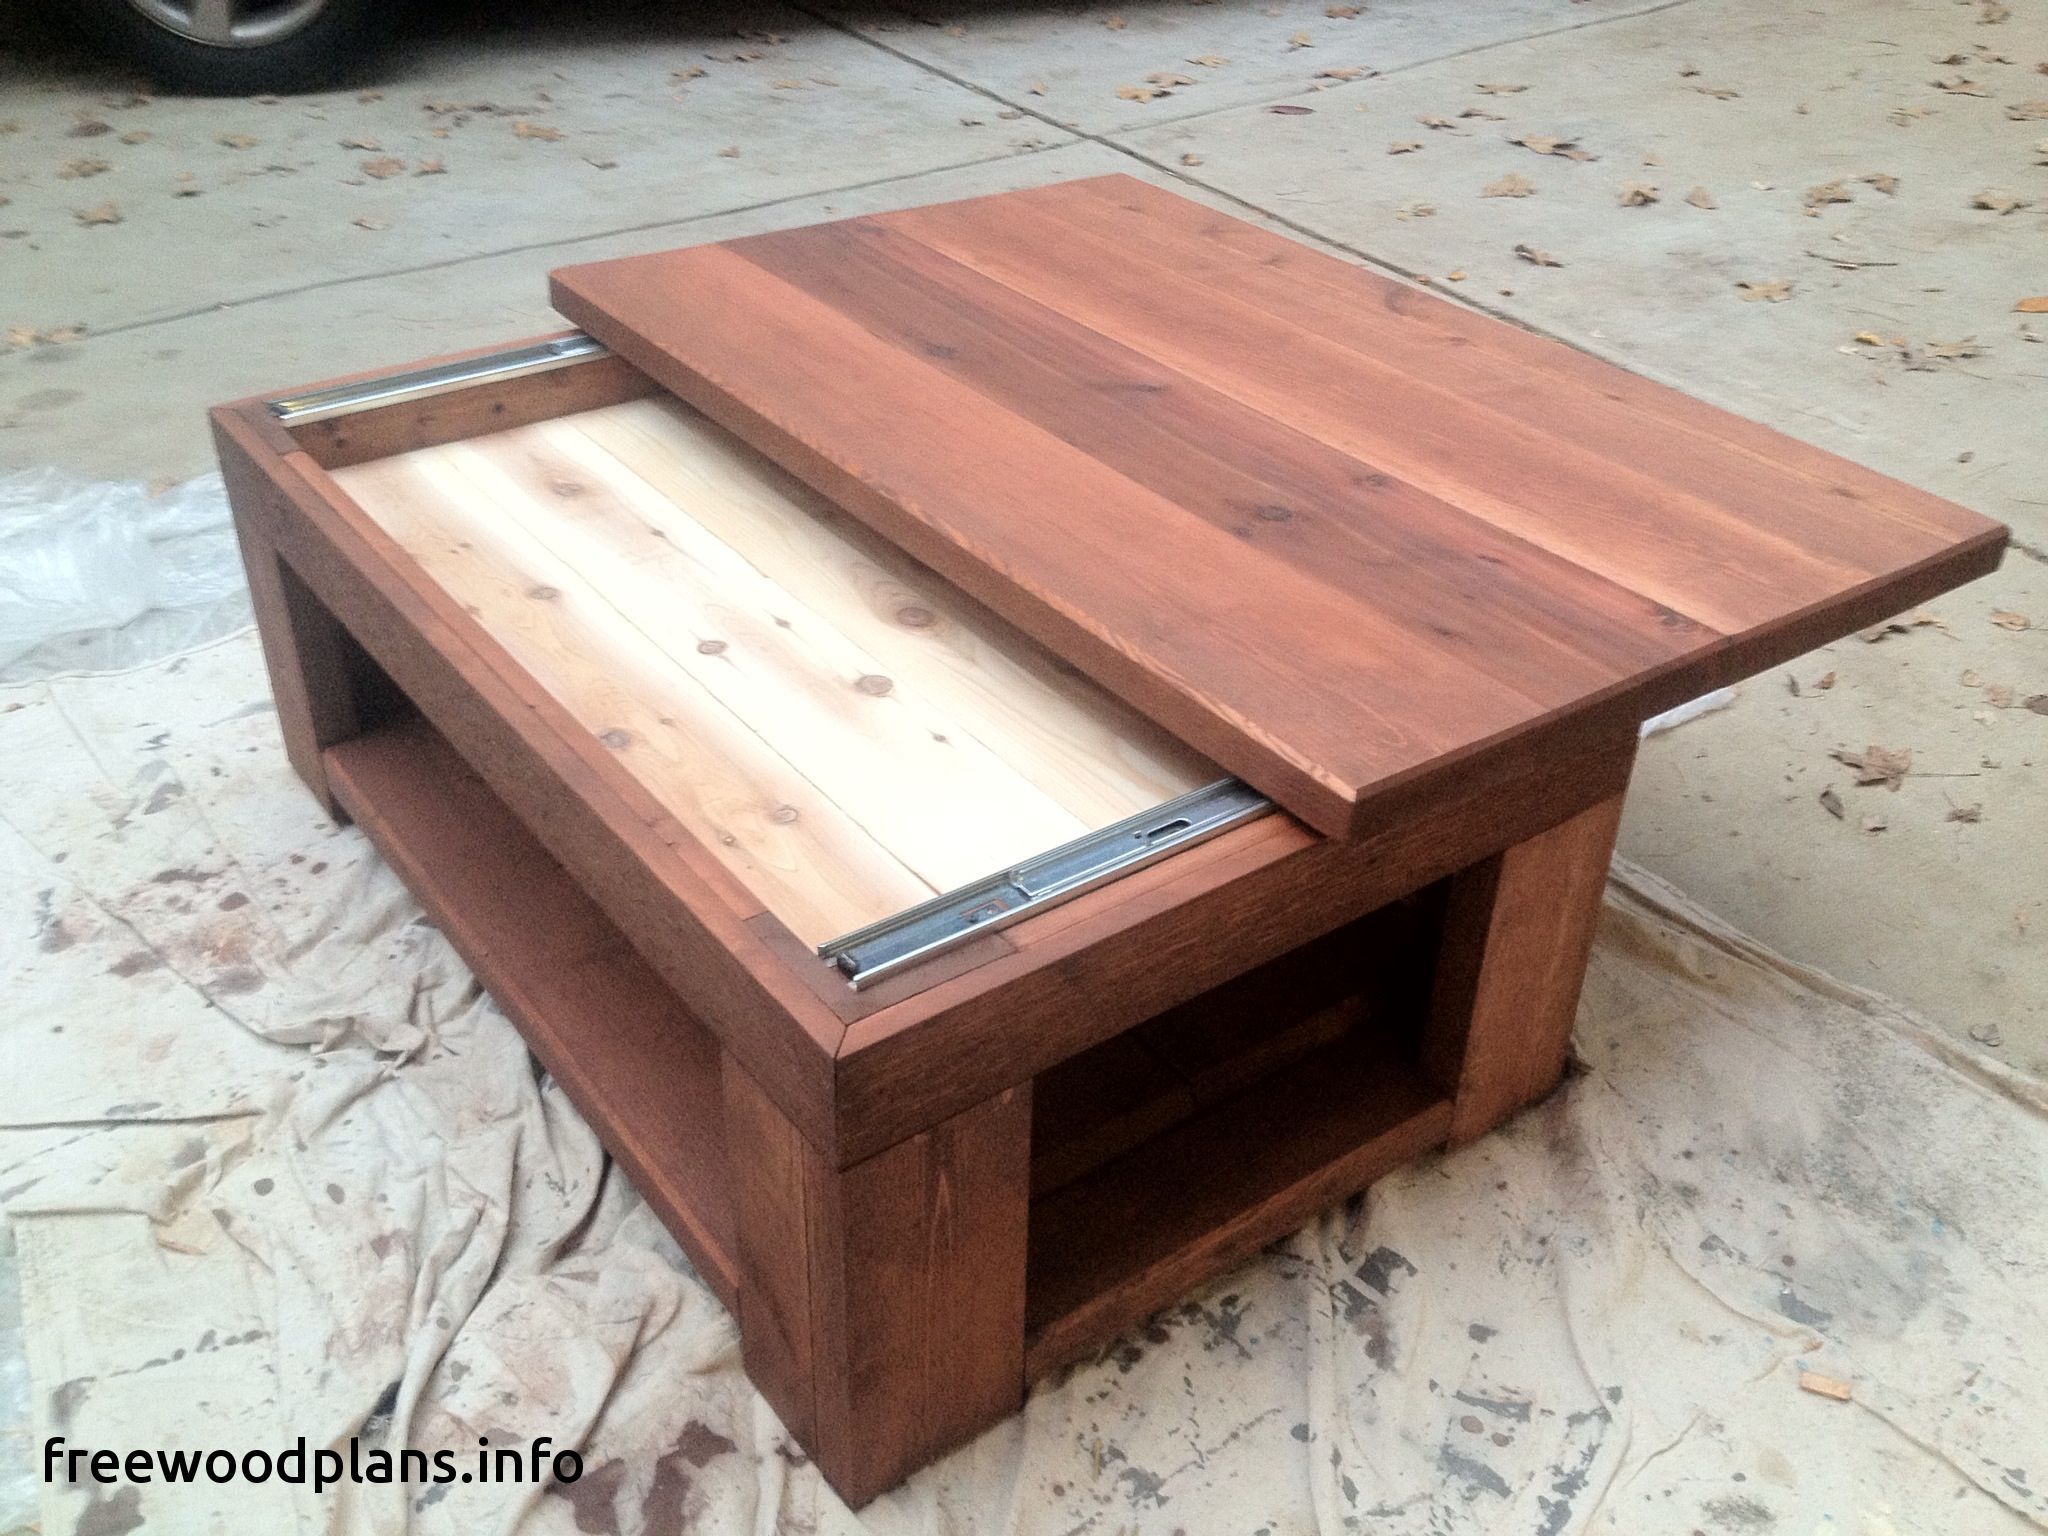 28 Woodworking Plans With Hidden Compartments 2019 | Coffee Table Inside Coffee Tables With Hidden Compartments (Gallery 9 of 20)